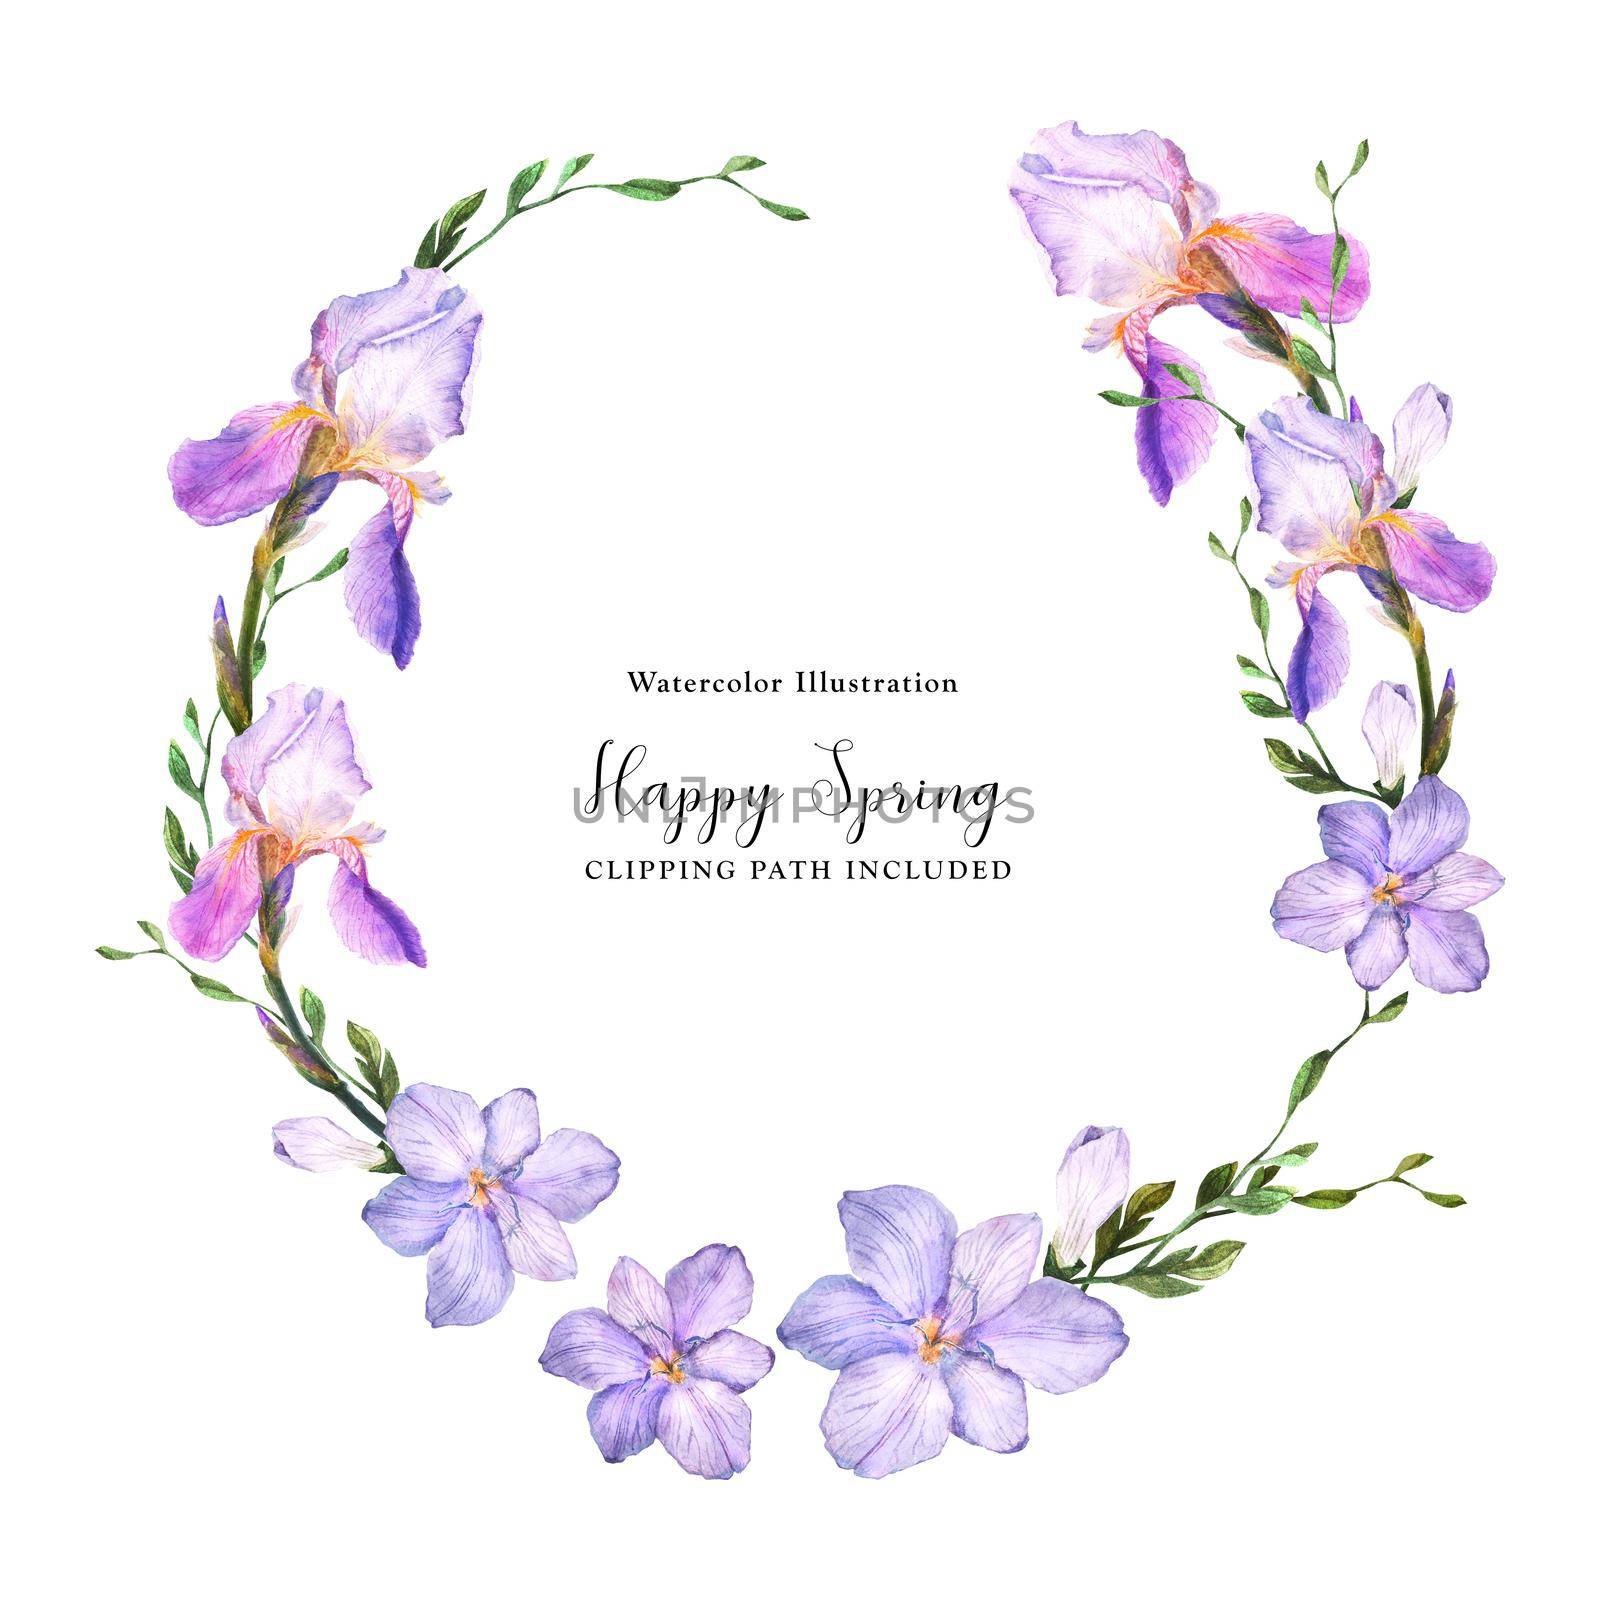 Decorative watercolor wreath with iris and freesia flowers on a white background, watercolor with clipping path